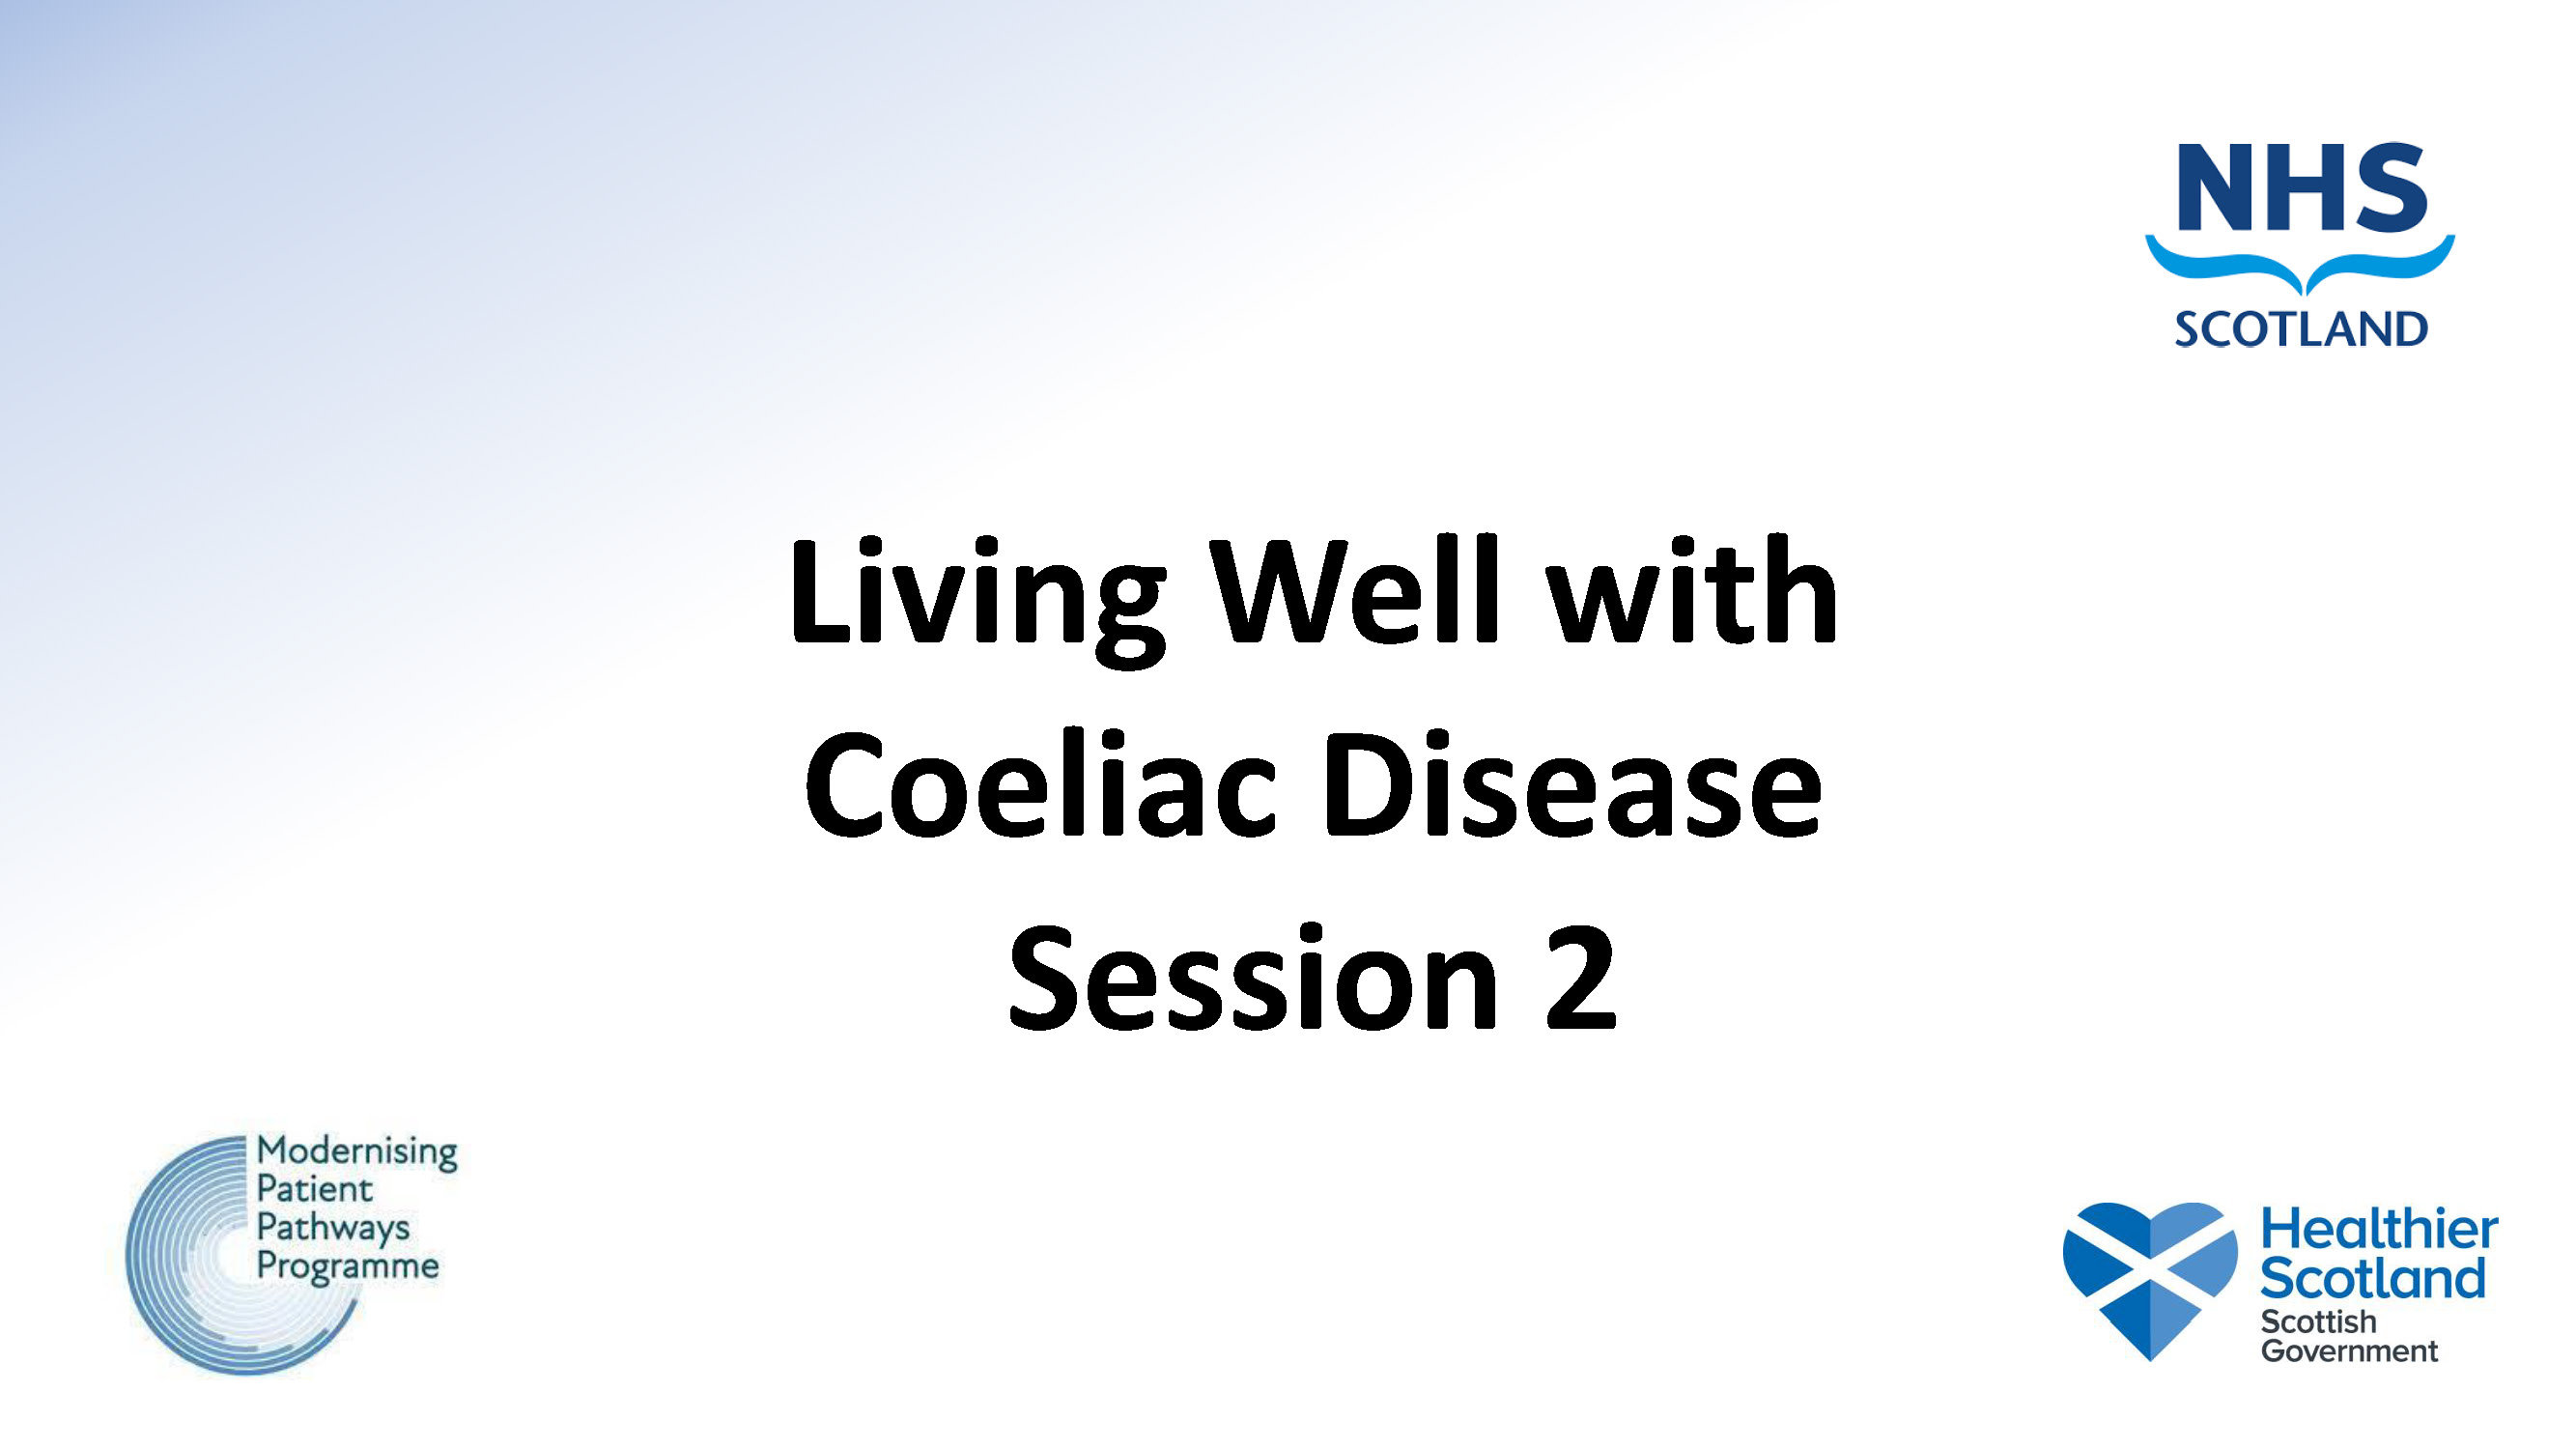 Living Well with Coeliac Disease - Session 2